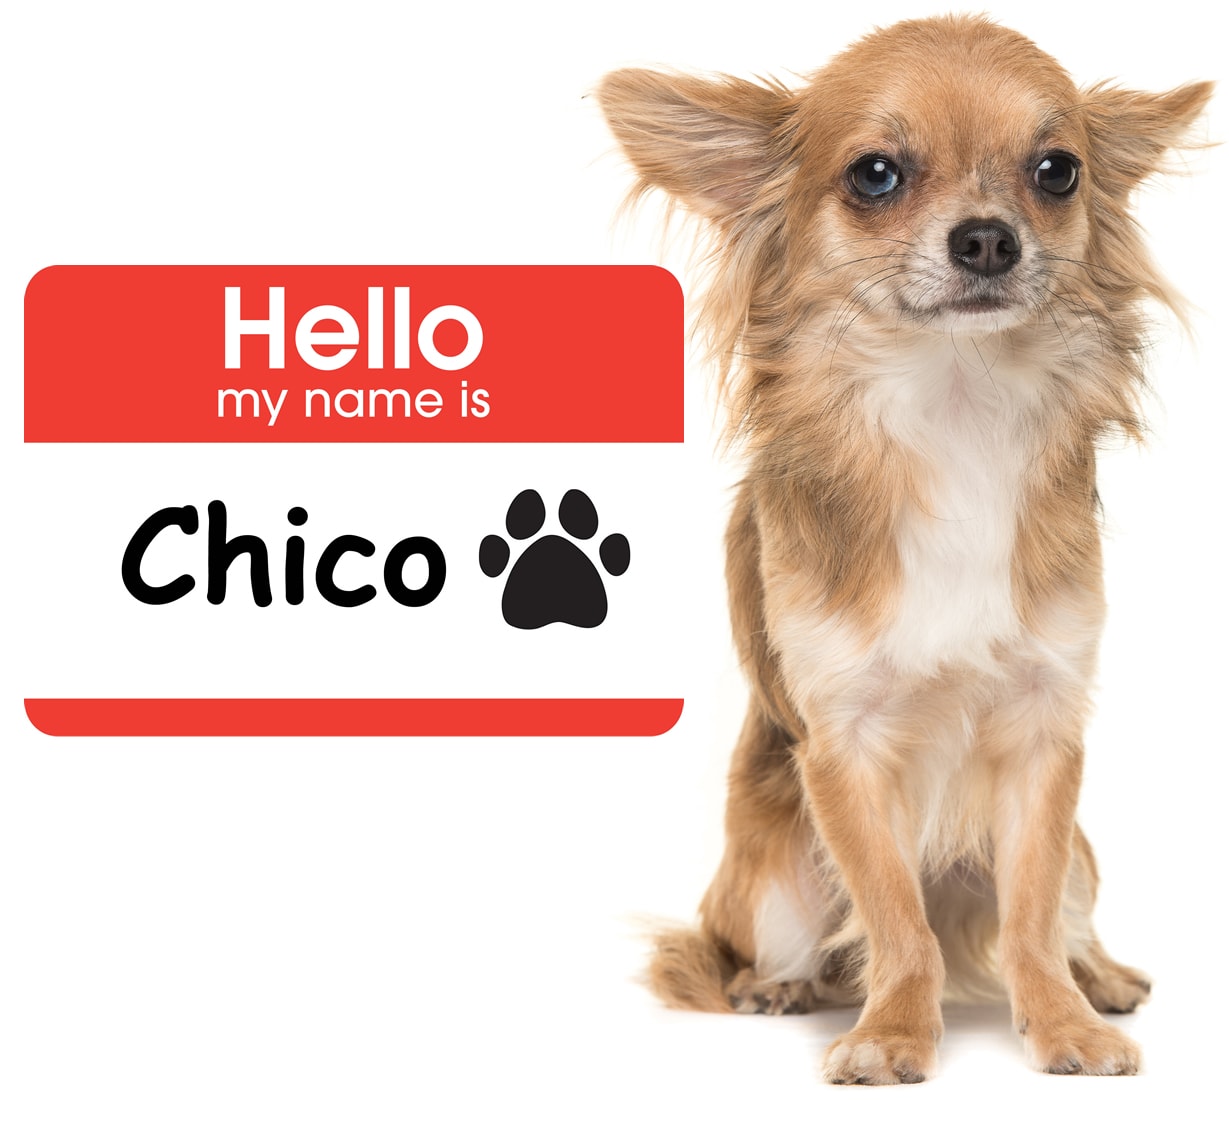 60 Amazing Facts About Chihuahuas That You Didnt Know